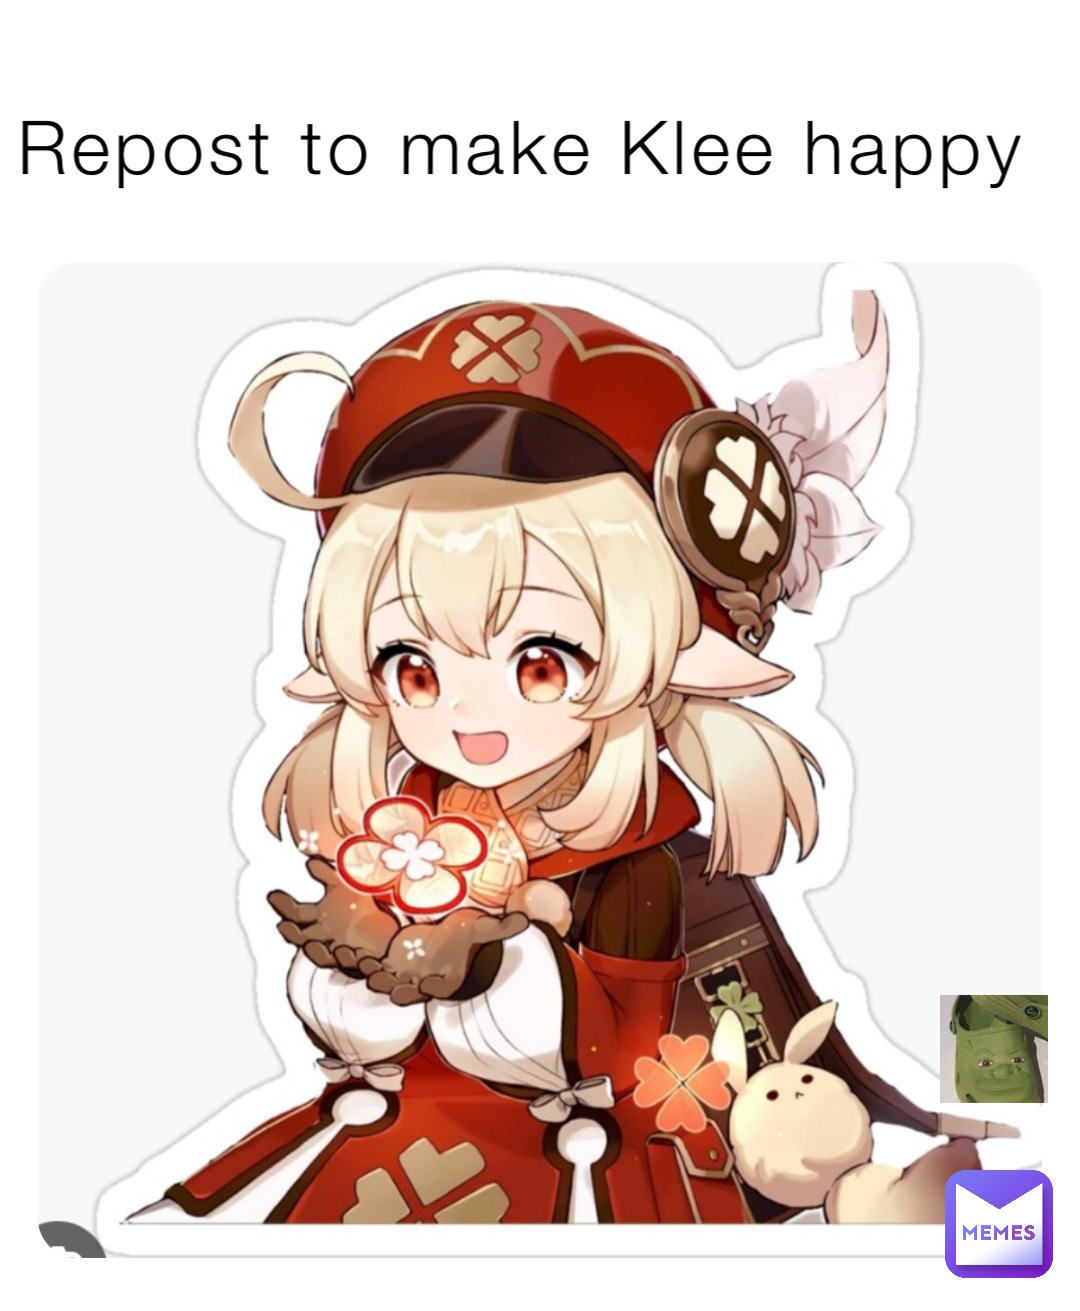 Repost to make Klee happy